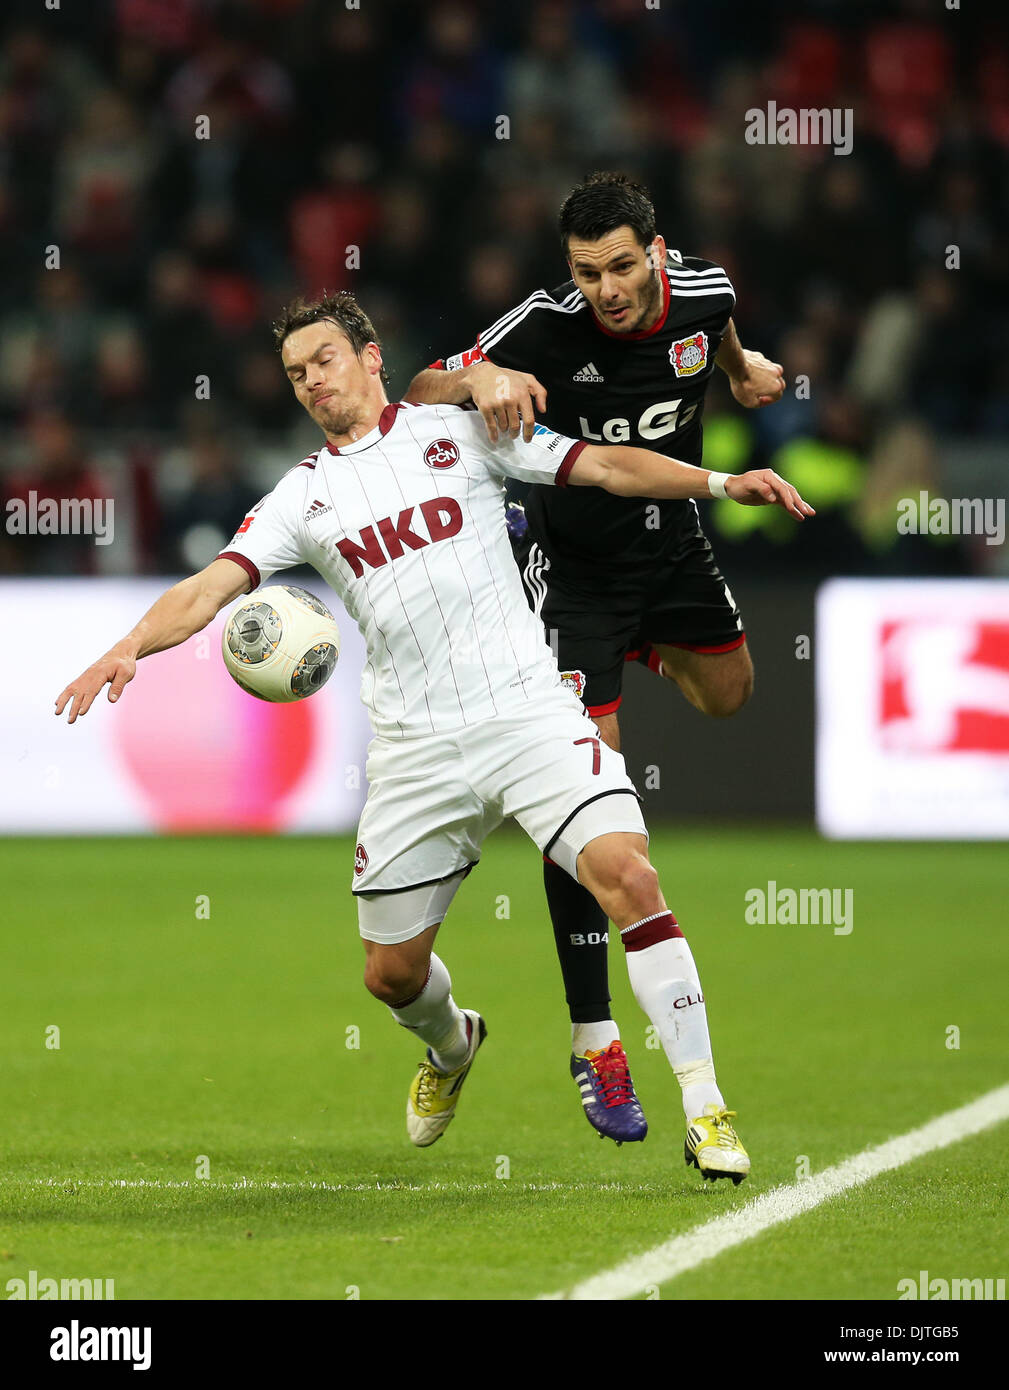 Leverkusen, Germany. 30th Nov, 2013. Nuremberg's Markus Feulner (L) and Leverkusen's Emir Saphic vie for the ball during the Bundesliga soccer match between Bayer o4 Leverkusen and 1. FC Nuremberg in the BayArena in Leverkusen, Germany, 30 November 2013. Photo: Rolf Vennenbernd/dpa (ATTENTION: Due to the accreditation guidelines, the DFL only permits the publication and utilisation of up to 15 pictures per match on the internet and in online media during the match.)/dpa/Alamy Live News Stock Photo